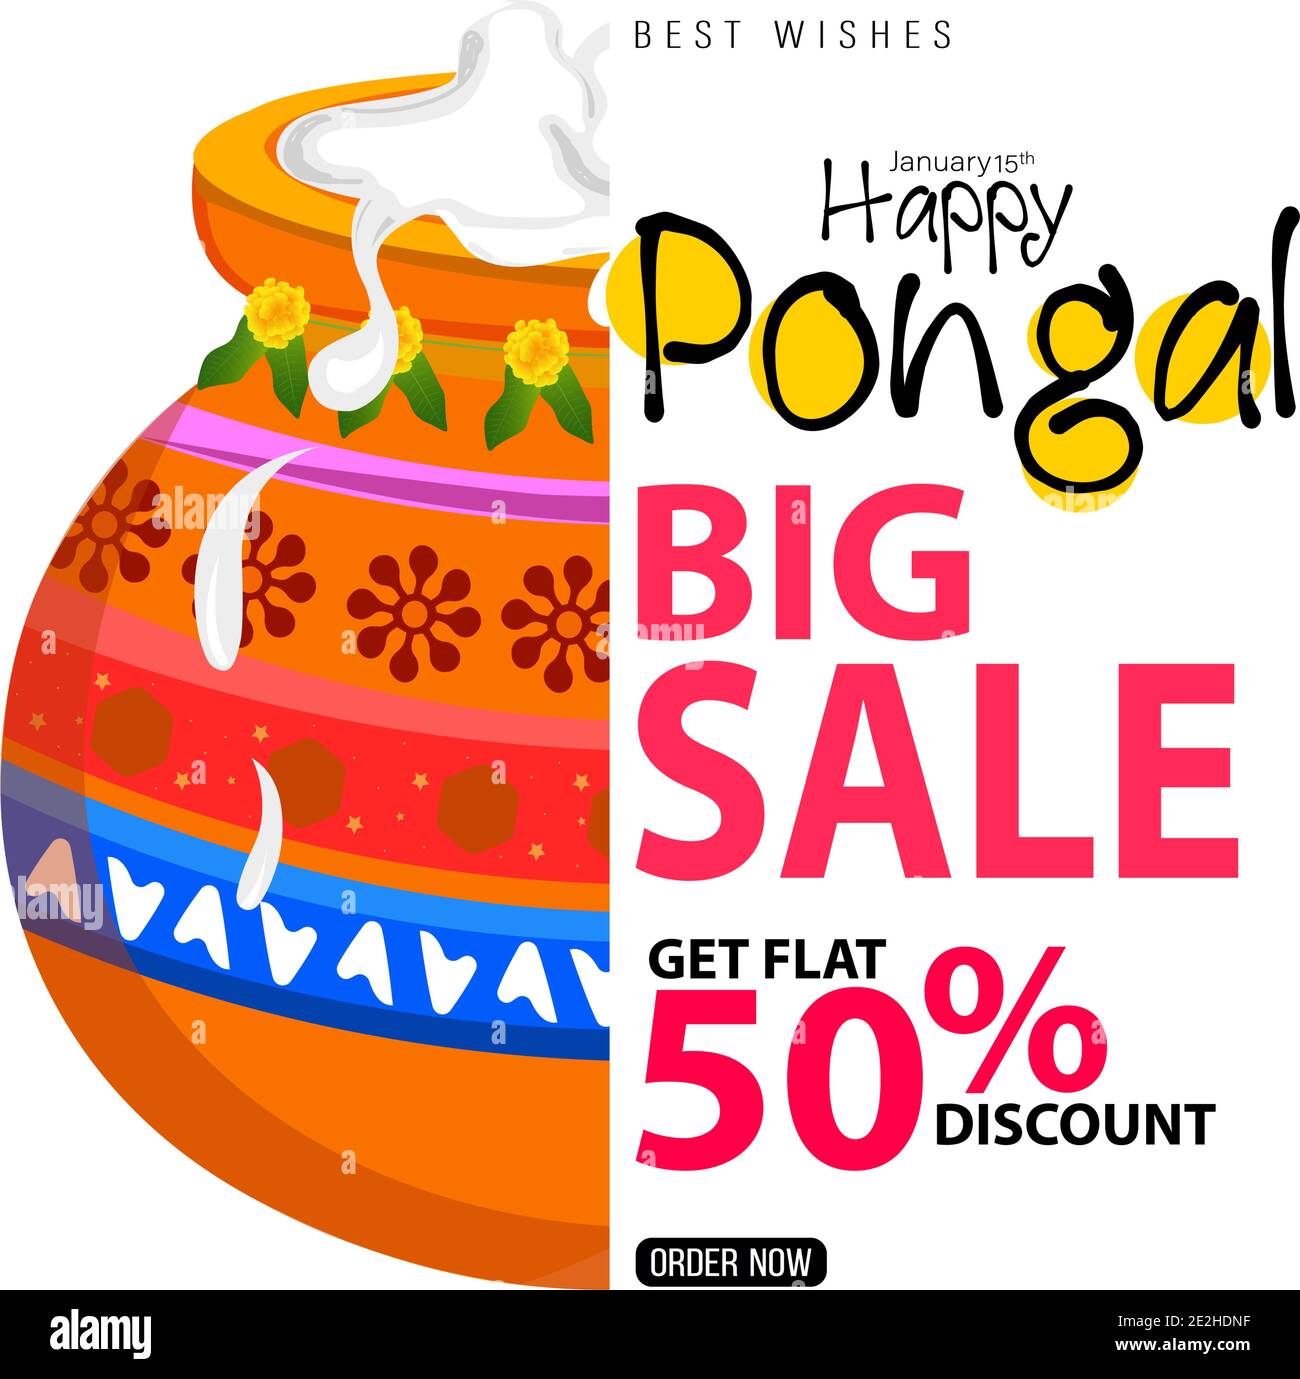 Happy Pongal Festival Sale Template Design - Indian Religion Festival Pongal Background Stock Vector